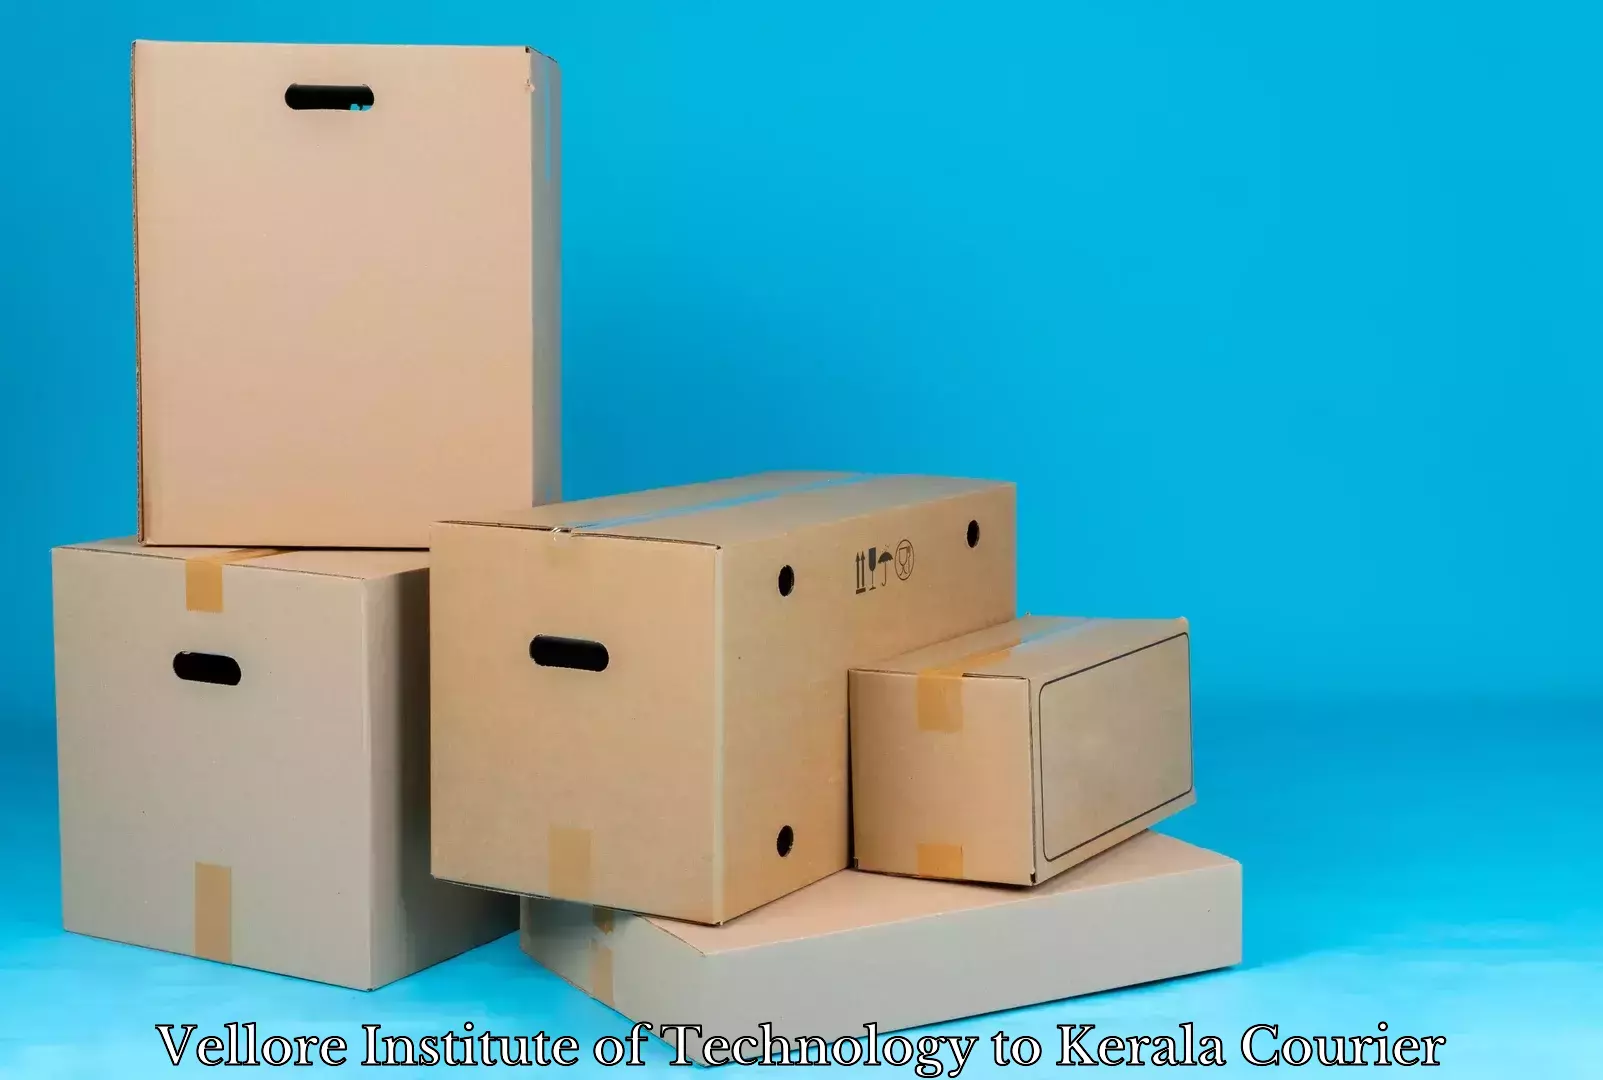 Efficient moving company Vellore Institute of Technology to Kuchi